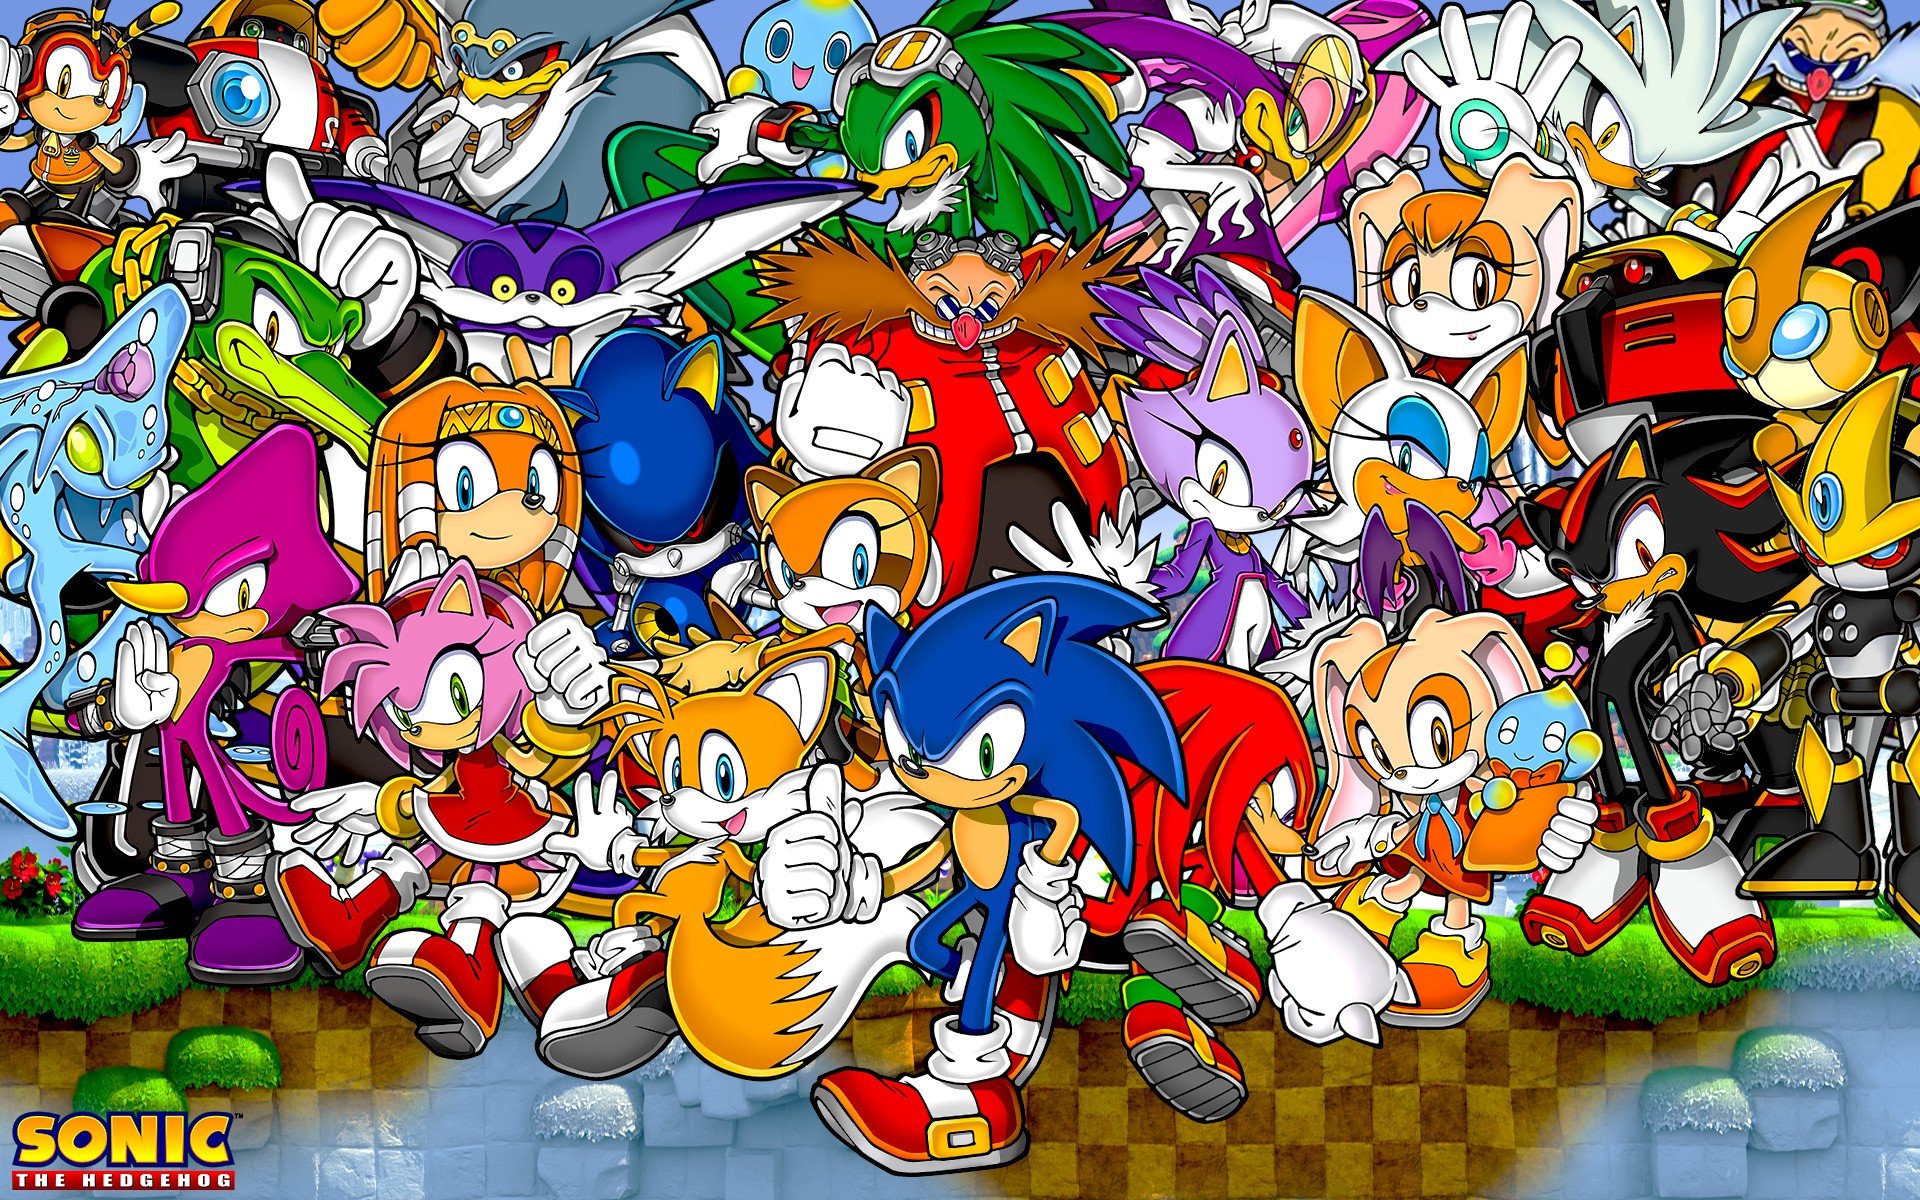 Tails (character), Sonic, Sonic the Hedgehog, Metal Sonic, Knuckles Wallpaper